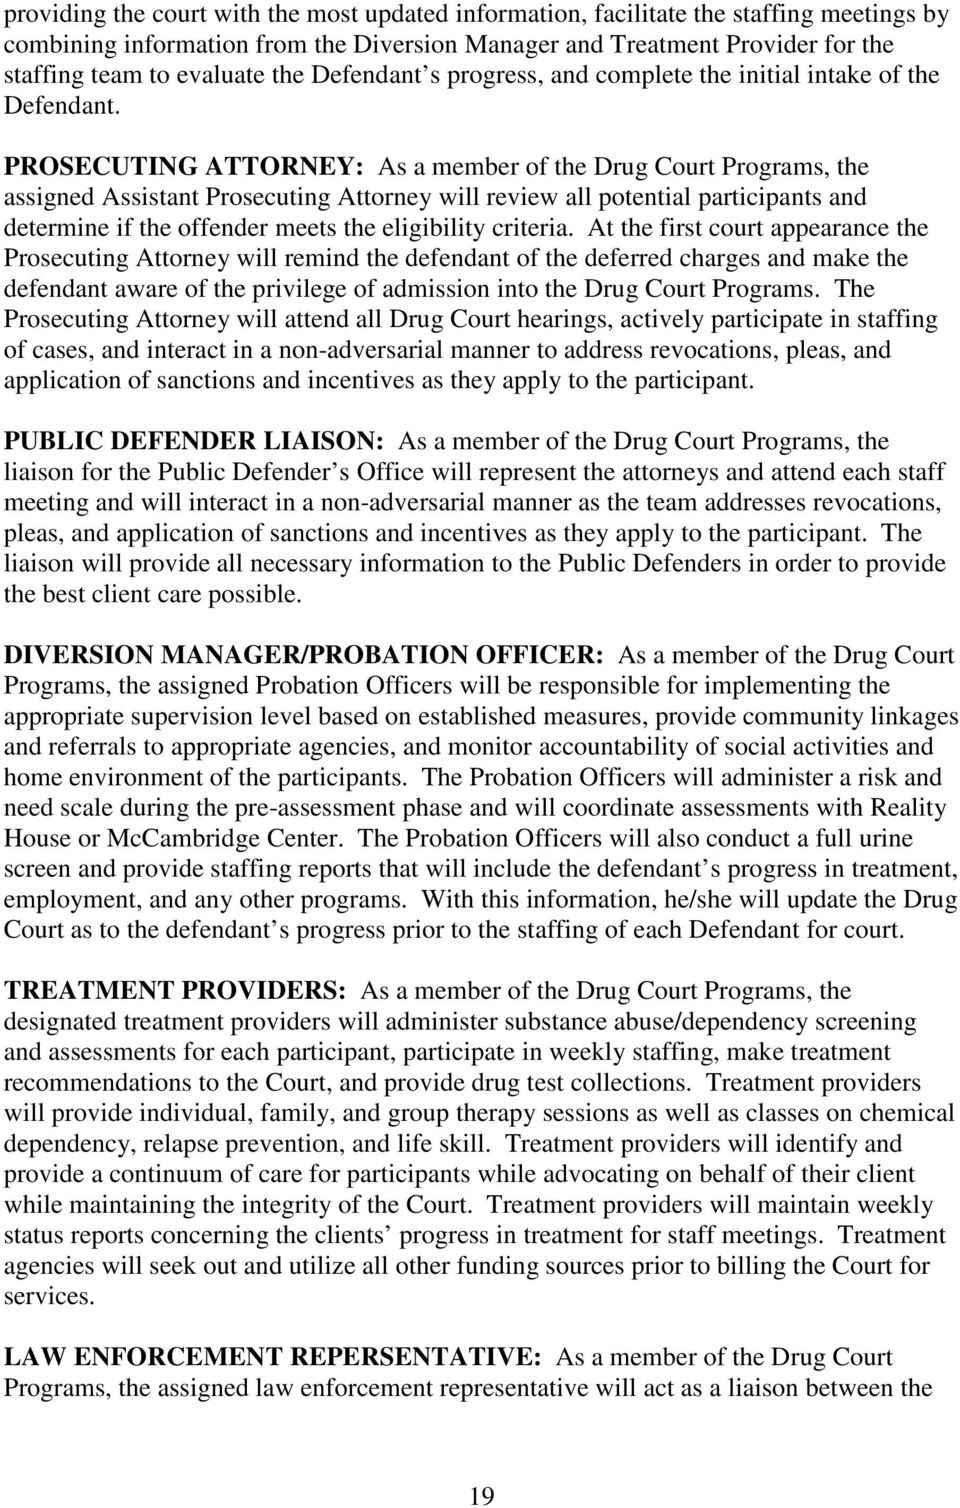 PROSECUTING ATTORNEY: As a member of the Drug Court Programs, the assigned Assistant Prosecuting Attorney will review all potential participants and determine if the offender meets the eligibility